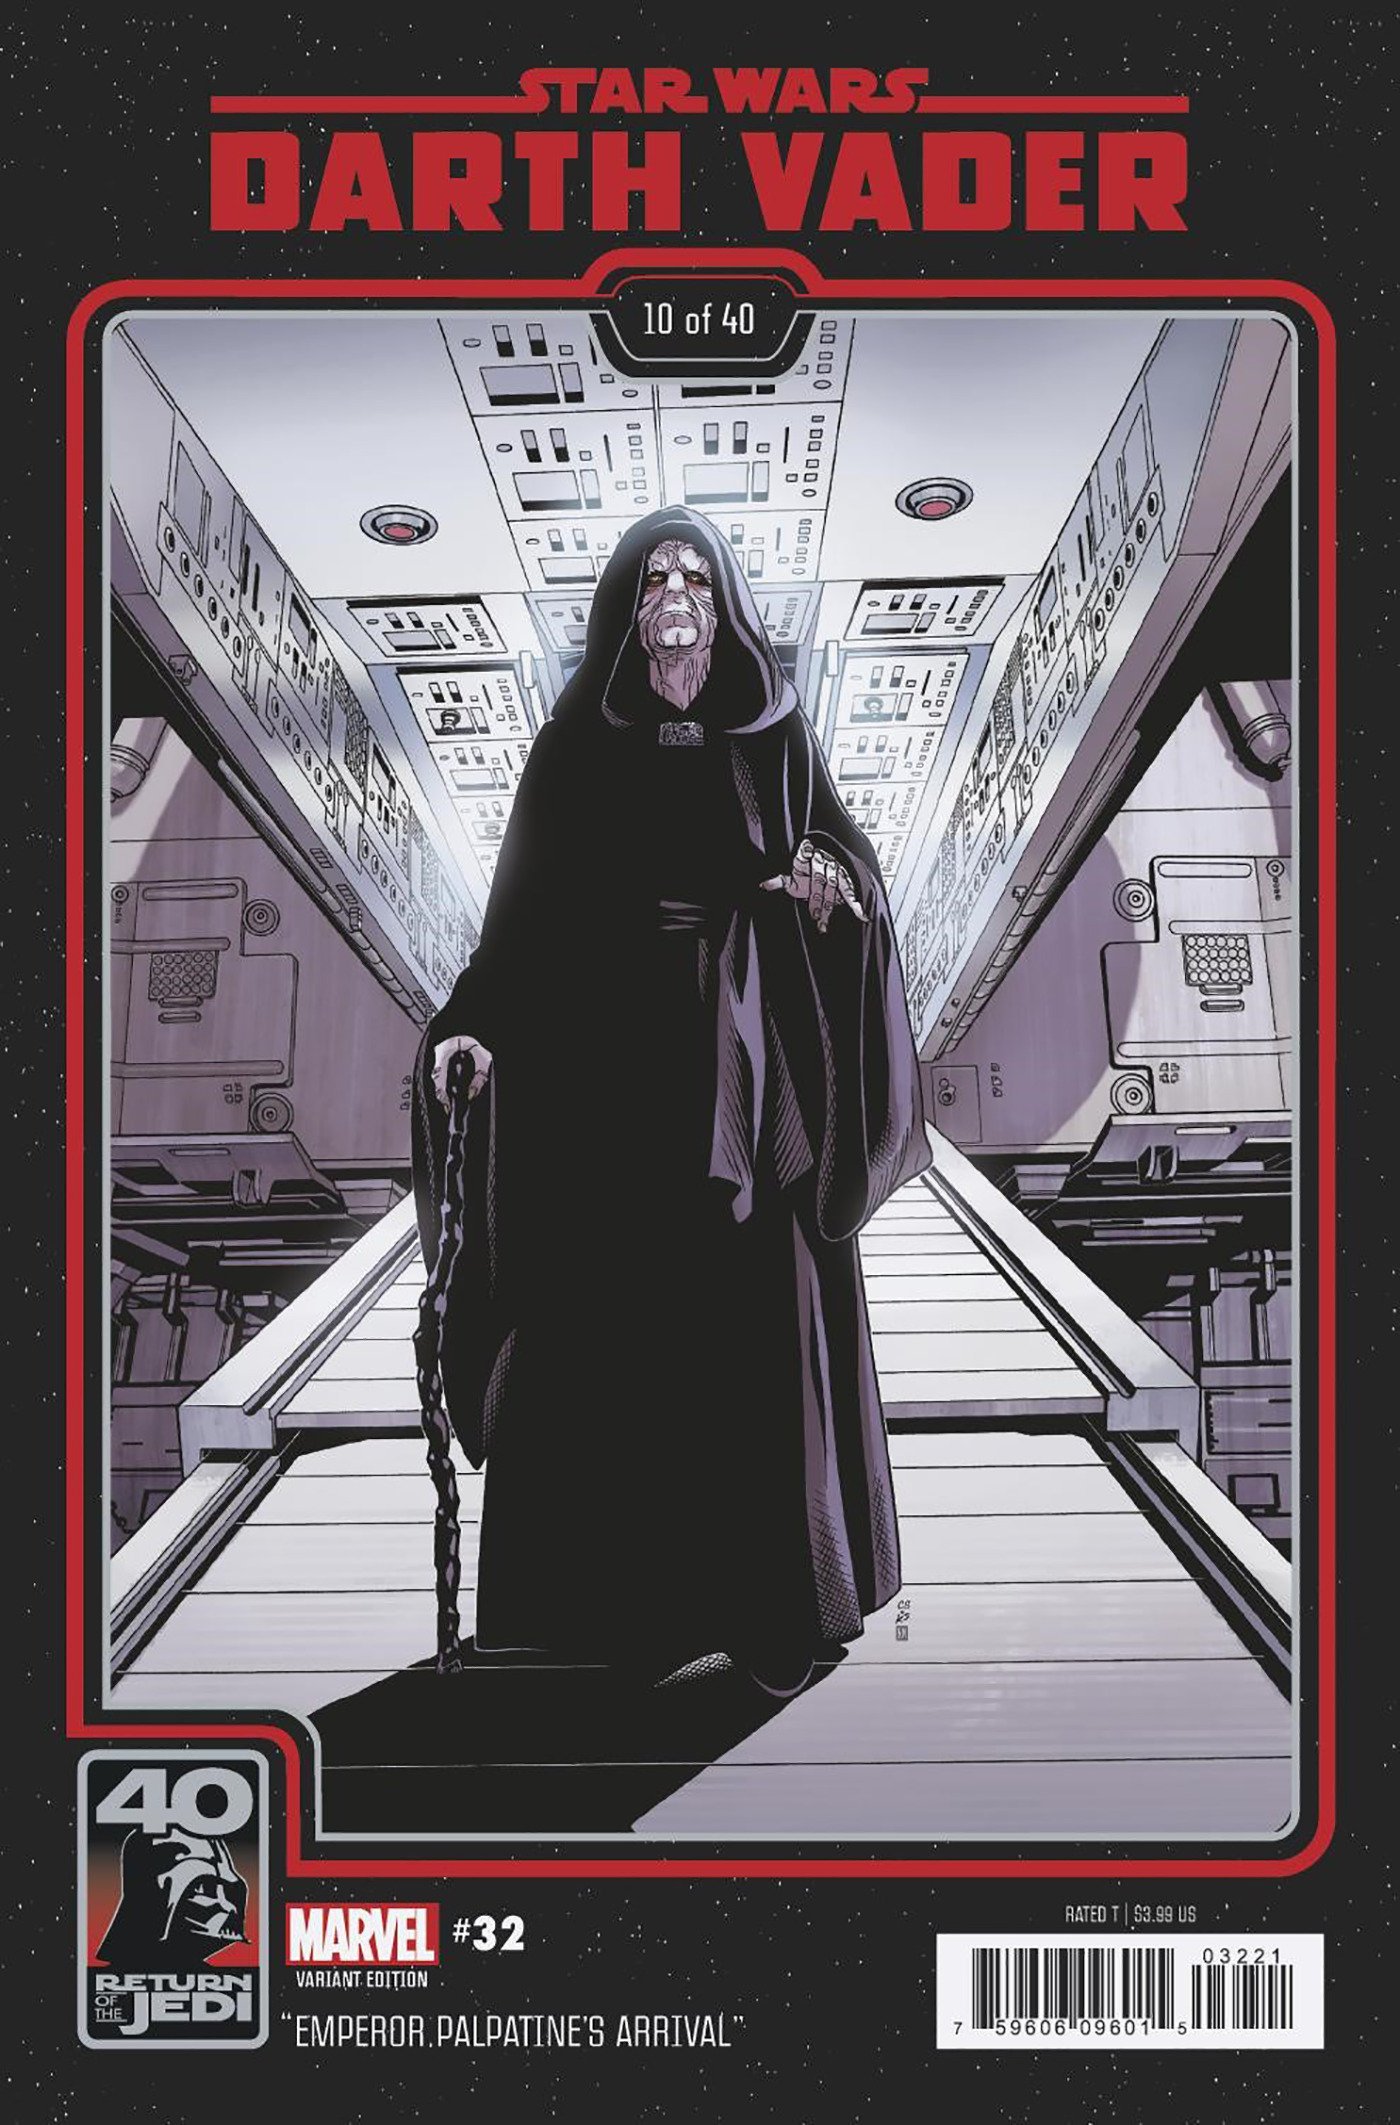 Darth Vader #32 (Chris Sprouse Return of the Jedi 40th Anniversary Variant Cover 10 of 40) (22.03.2023)